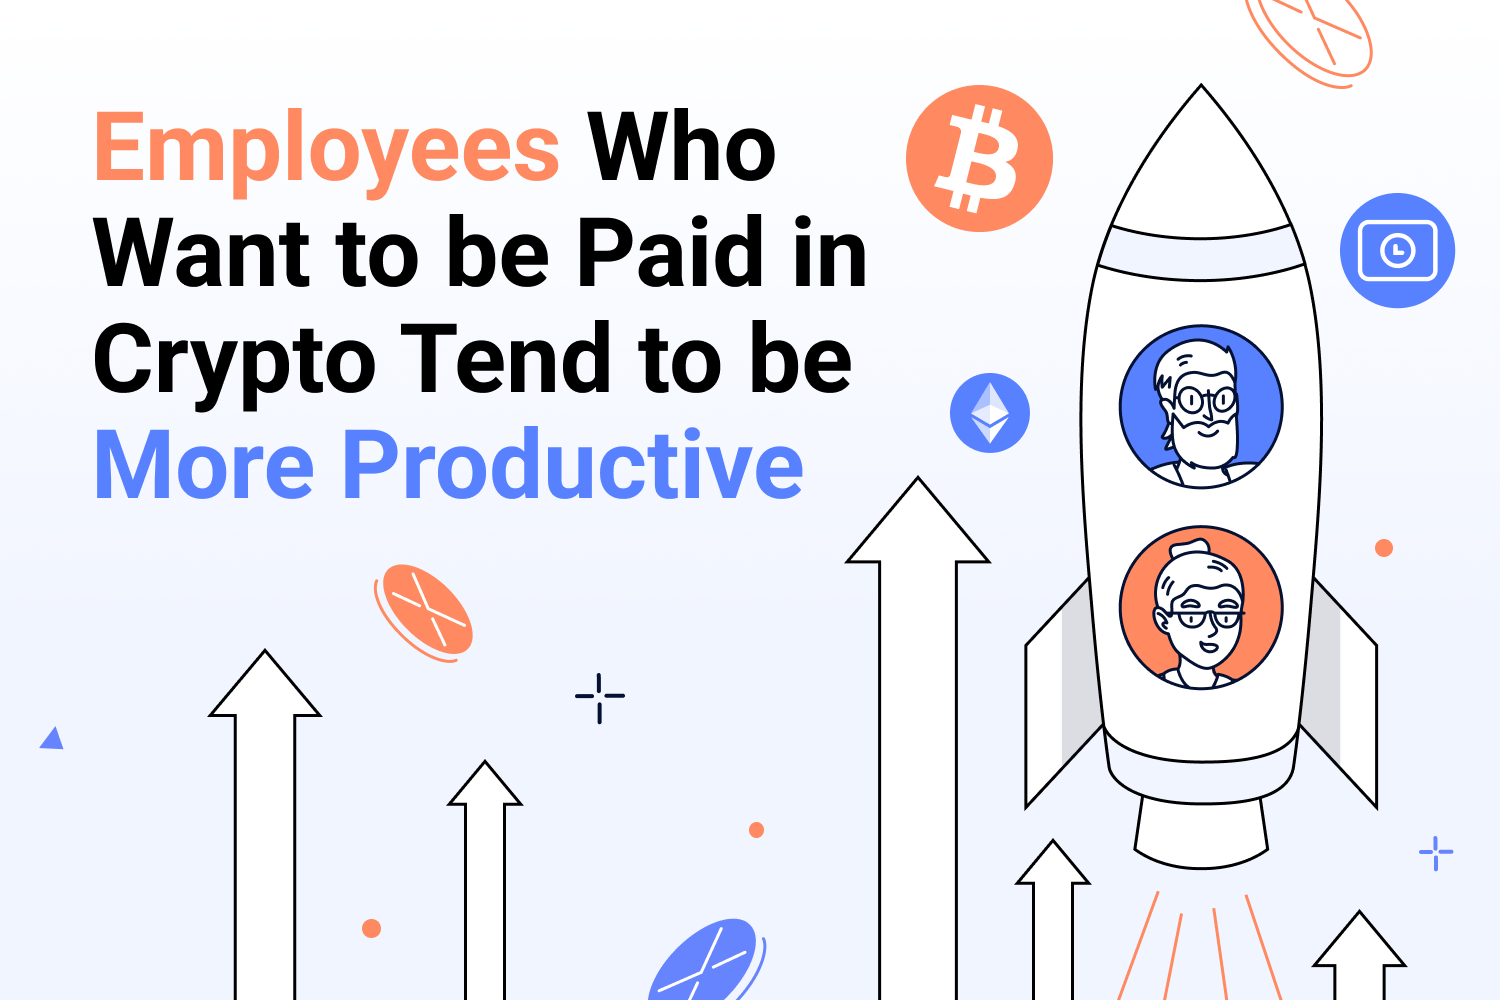 Employees Who Want To Be Paid In Crypto Tend To Be More Productive